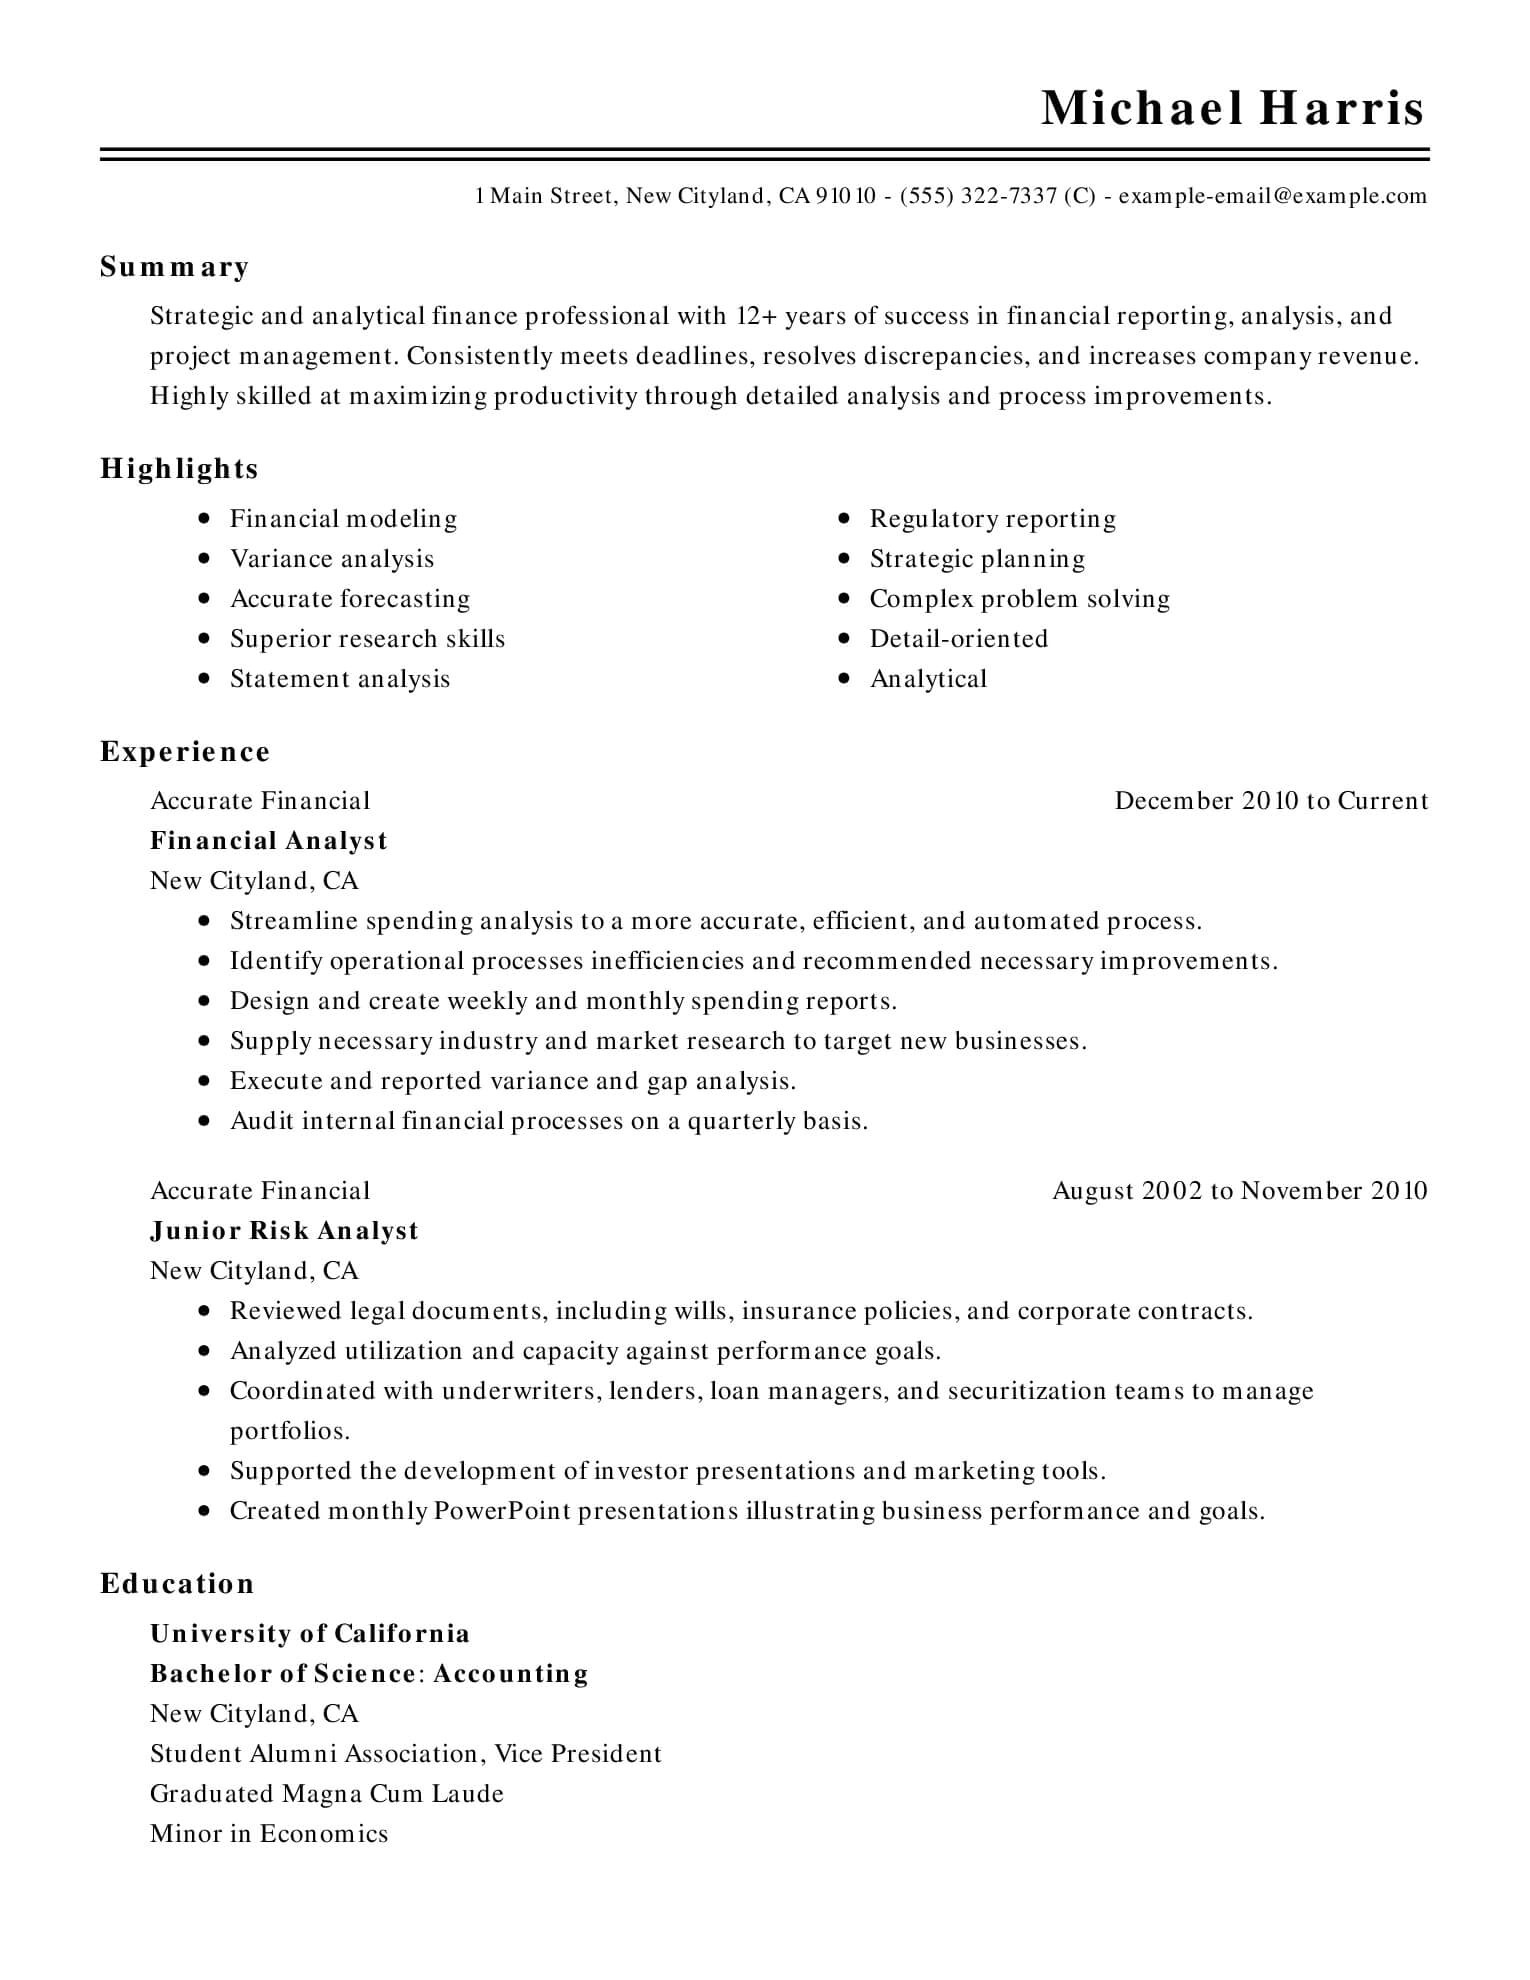 Official Resume format Word File 15 Of the Best Resume Templates for Microsoft Word Office